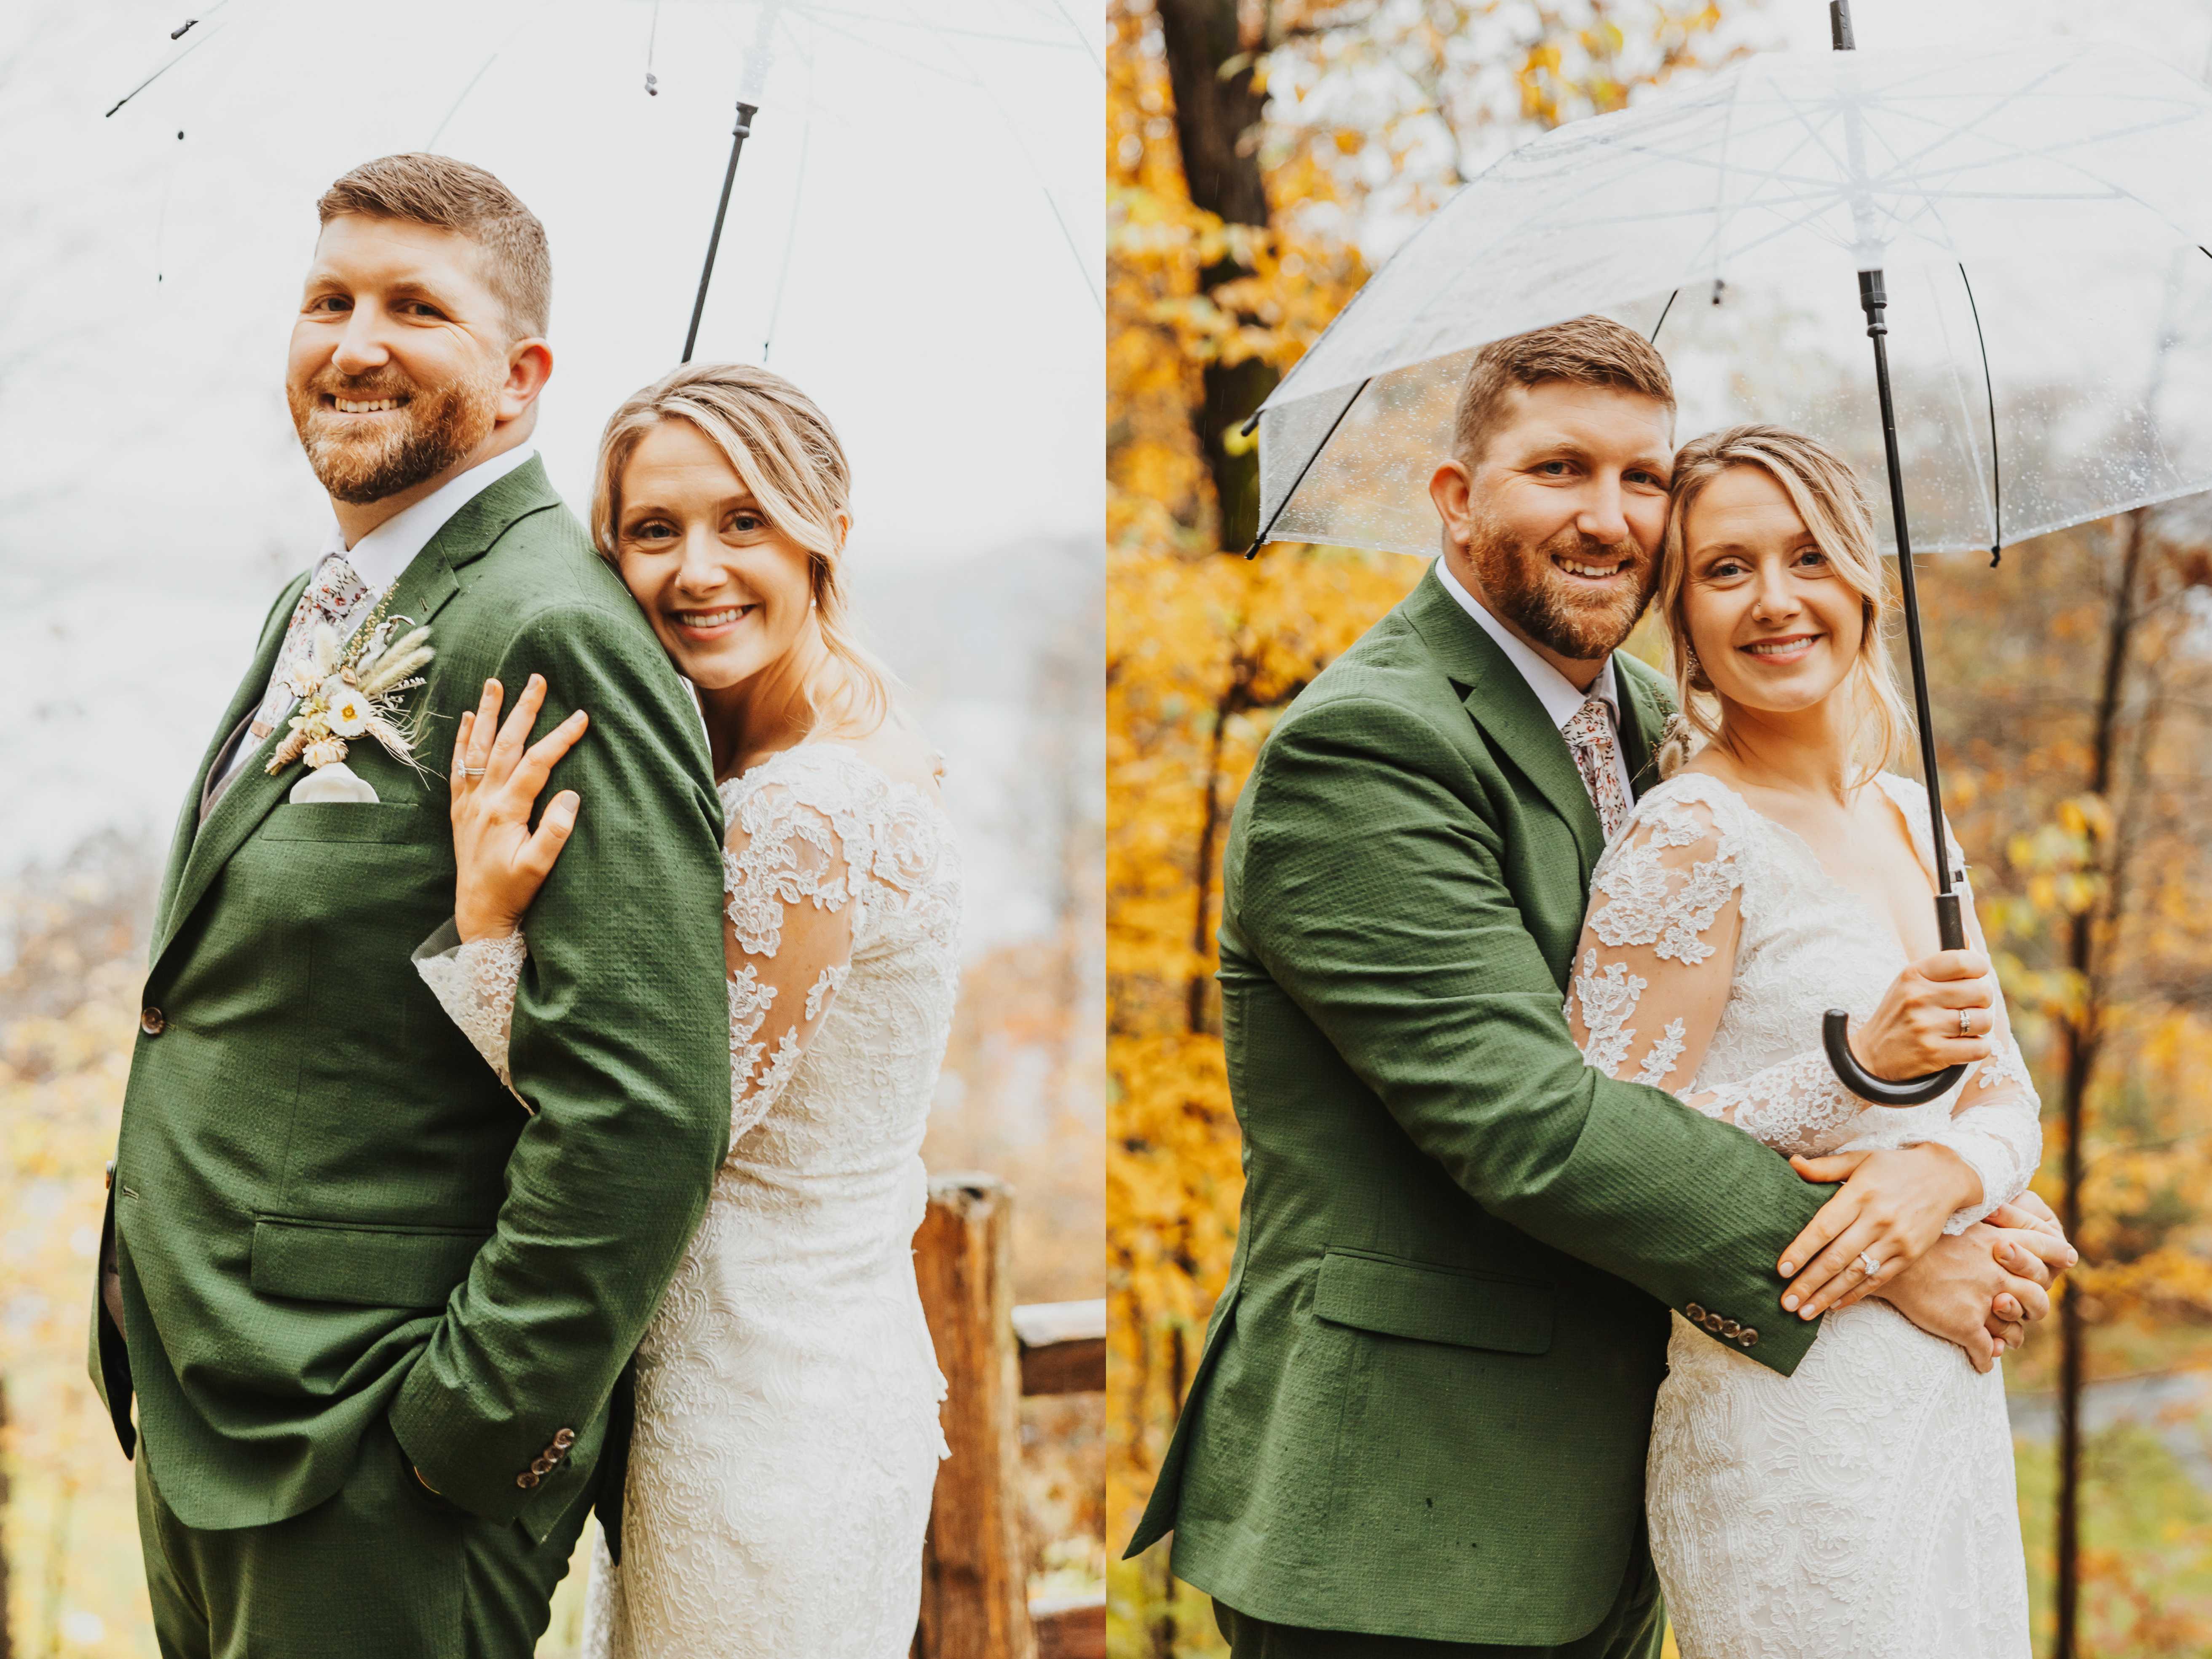 2 photos side by side of a bride and groom smiling at the camera under an umbrella, in the left the bride is hugging the groom from behind and in the right the groom is hugging the bride from behind